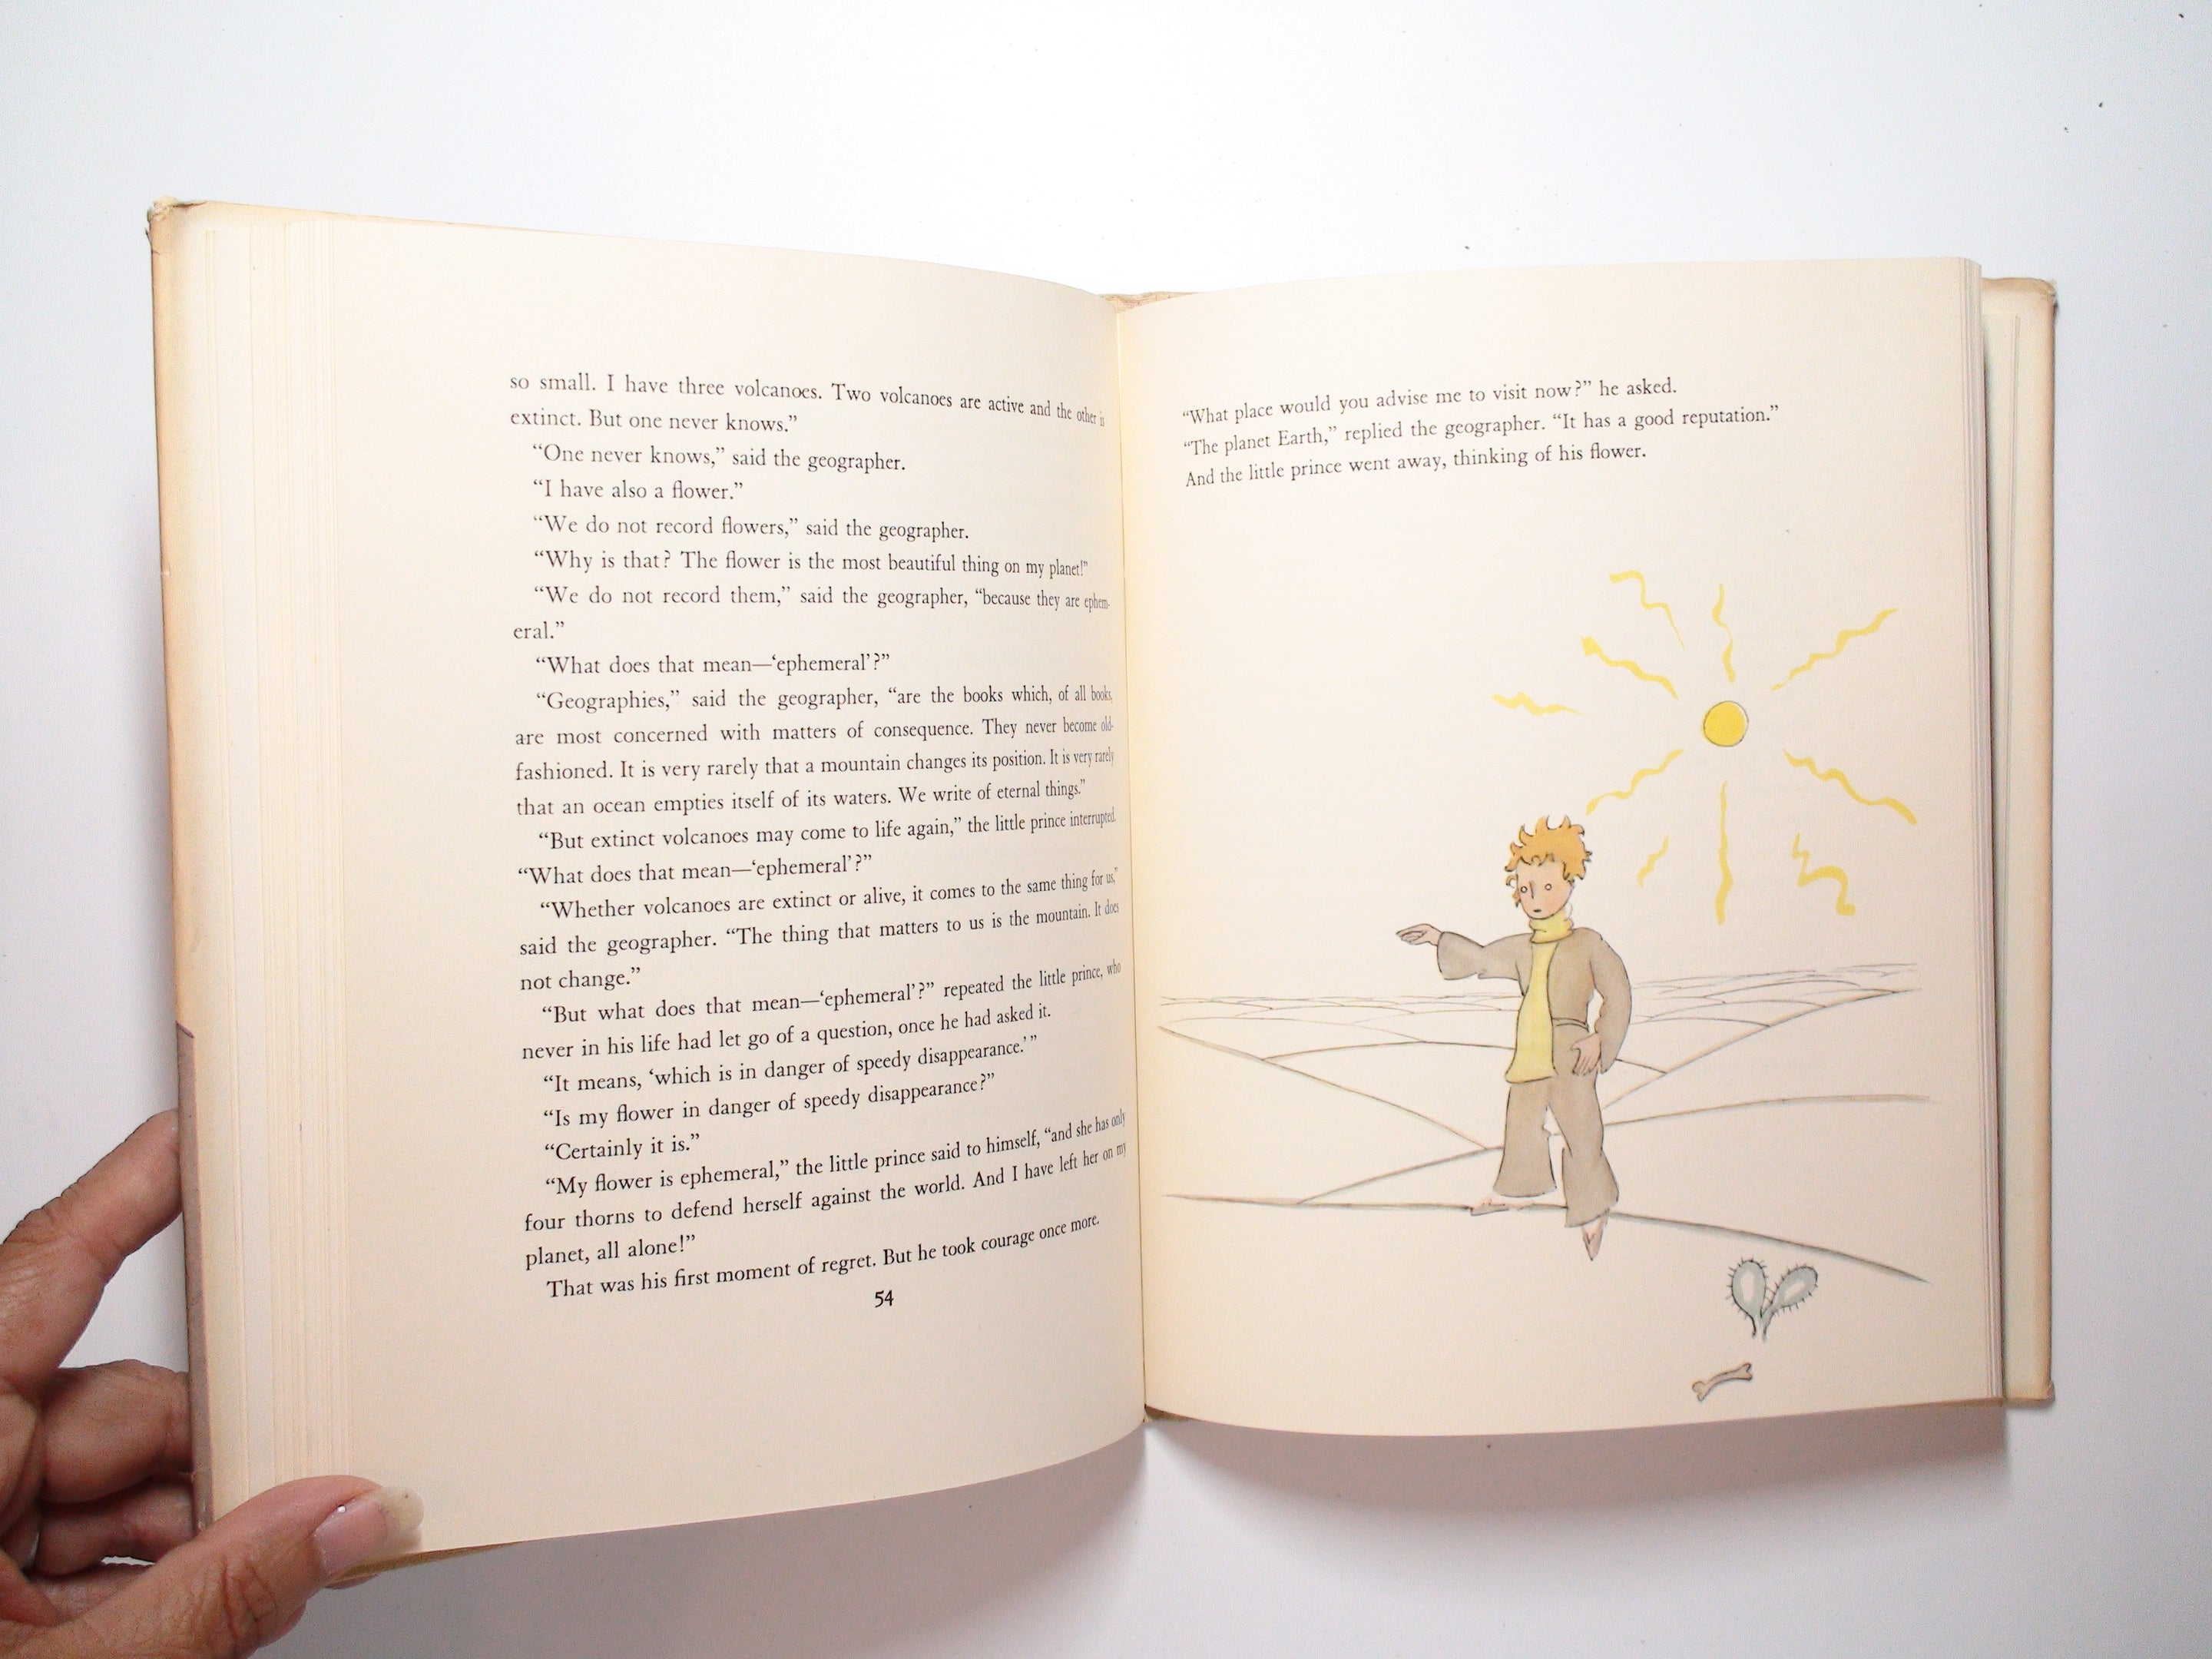 The Little Prince by Antoine De Saint-Exupery, Illustrated, with D/J, 1943/1960s